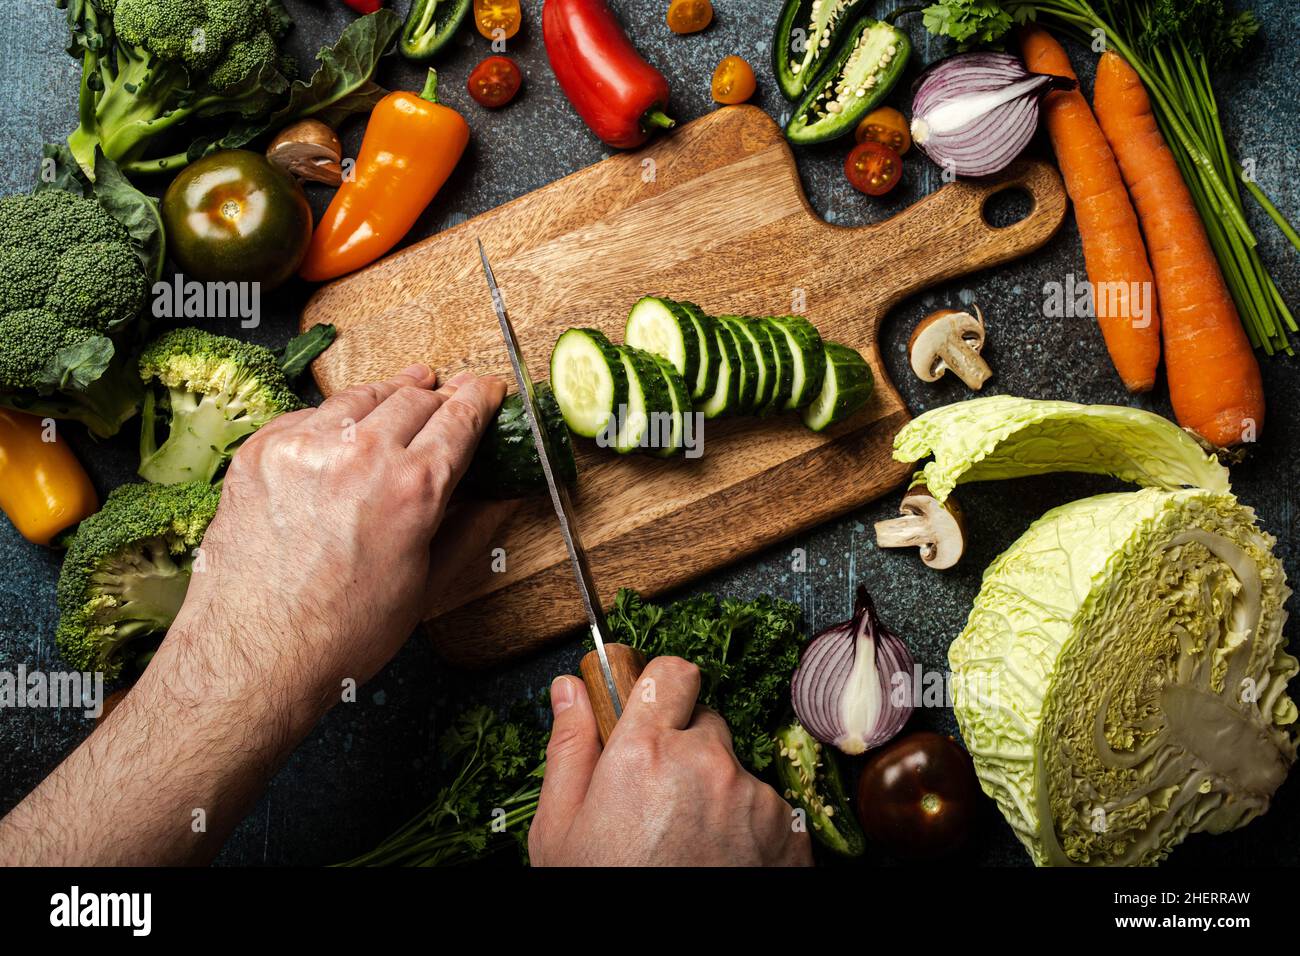 Man hands chopping cucumber on wooden cutting board with knife and assorted fresh vegetables Stock Photo